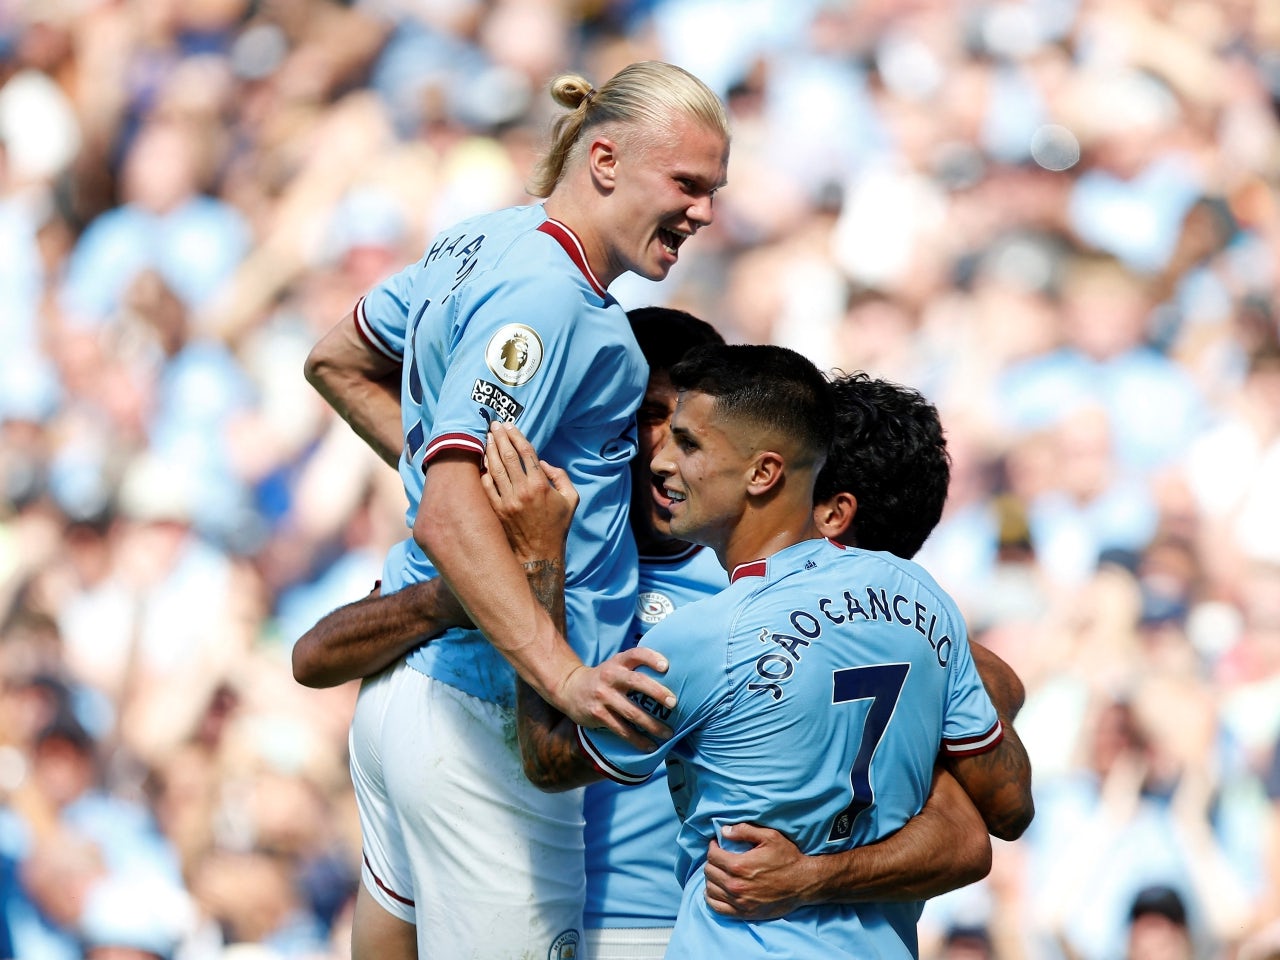 Manchester City's Ilkay Gundogan celebrates scoring their first goal with Erling Braut Haaland, Rodri and Joao Cancelo on August 13, 2022